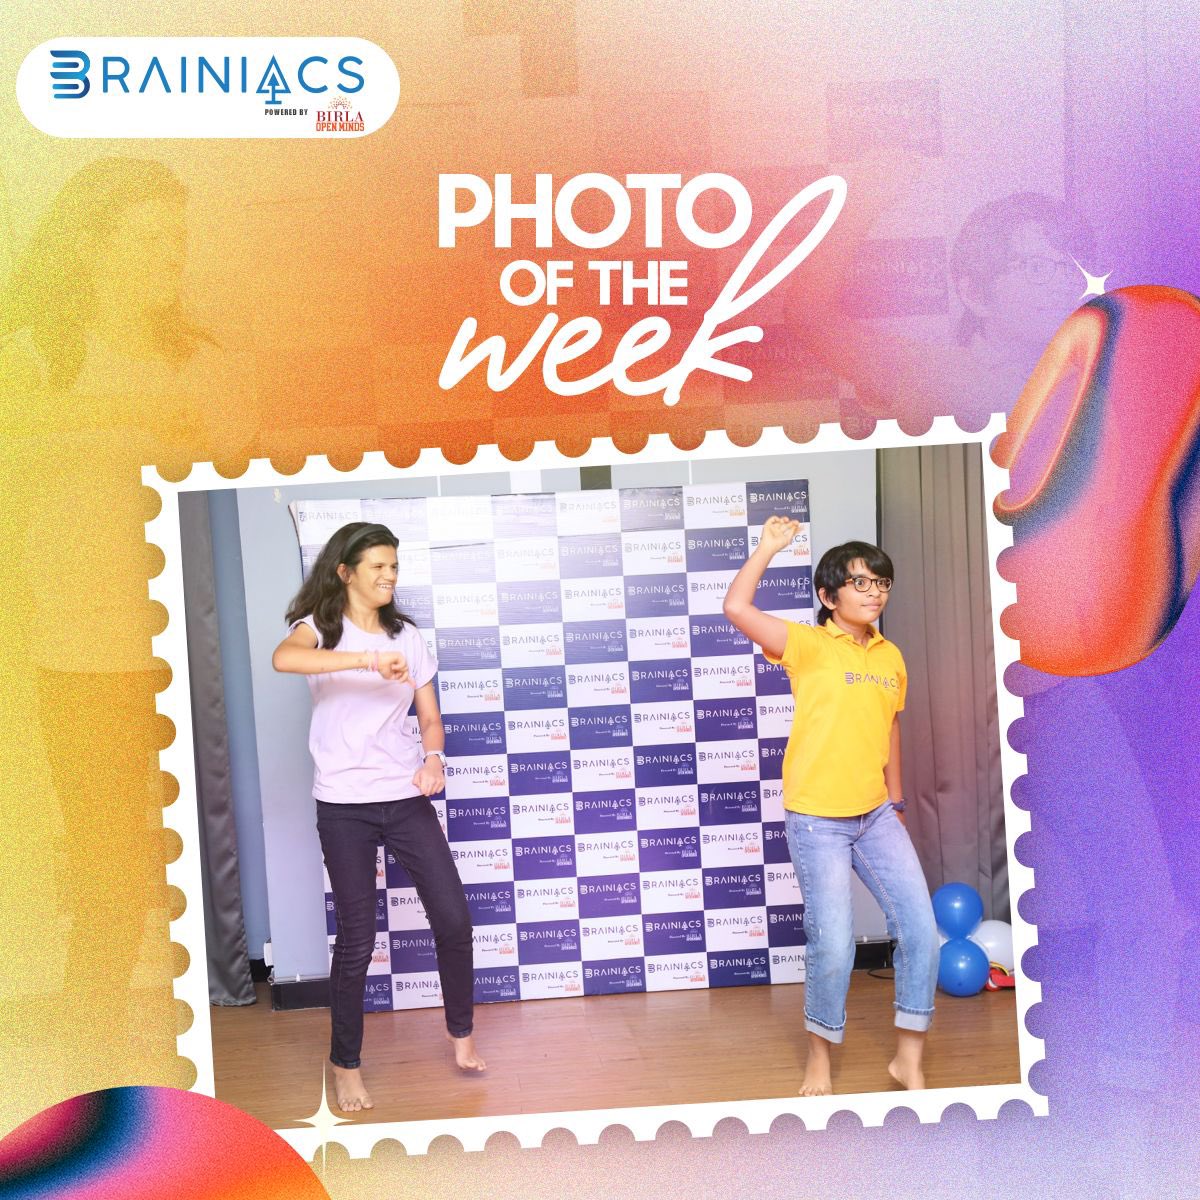 With Birla Brainiacs Hybrid Activities, your child gets the best of everything, from studies and art to sports and dance!

#Brainiacs #BirlaBrainiacs #HybridLearning #Homeschooling #Education #HybridEducation #CambridgeCurriculum #StudentPhoto #PhotooftheWeek